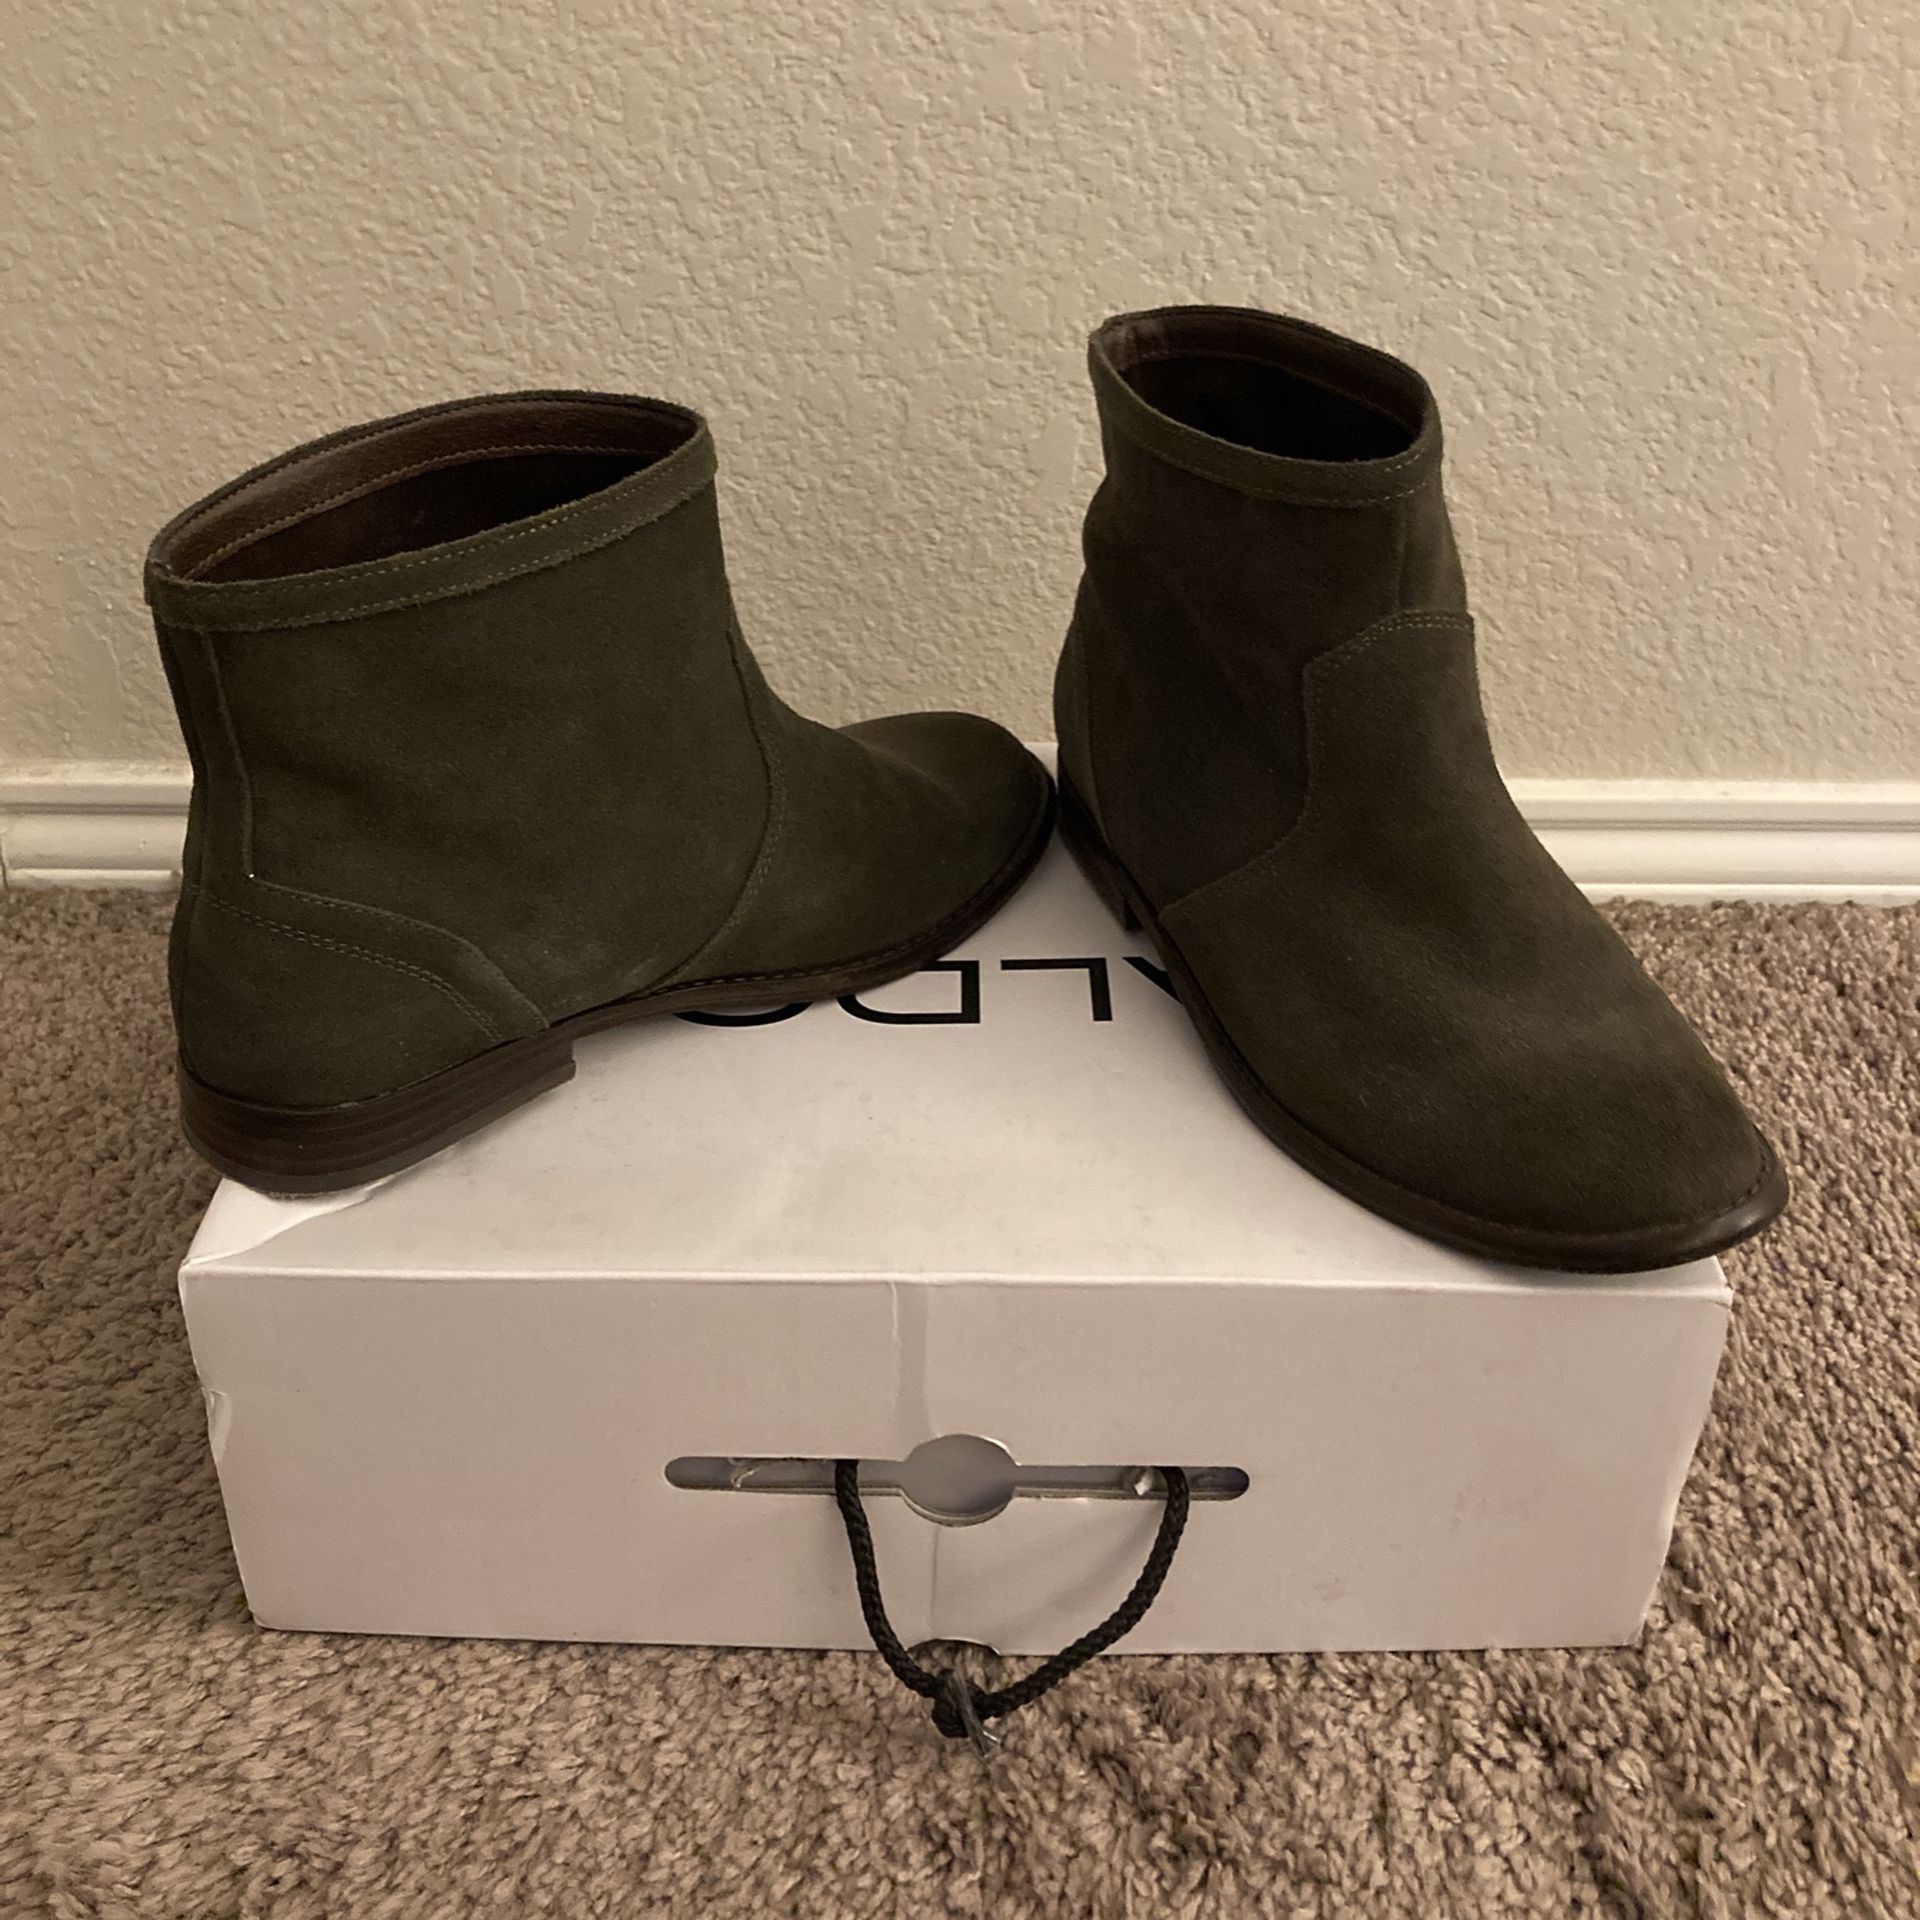 ALDO Suede Slip On Ankle Boots size 7